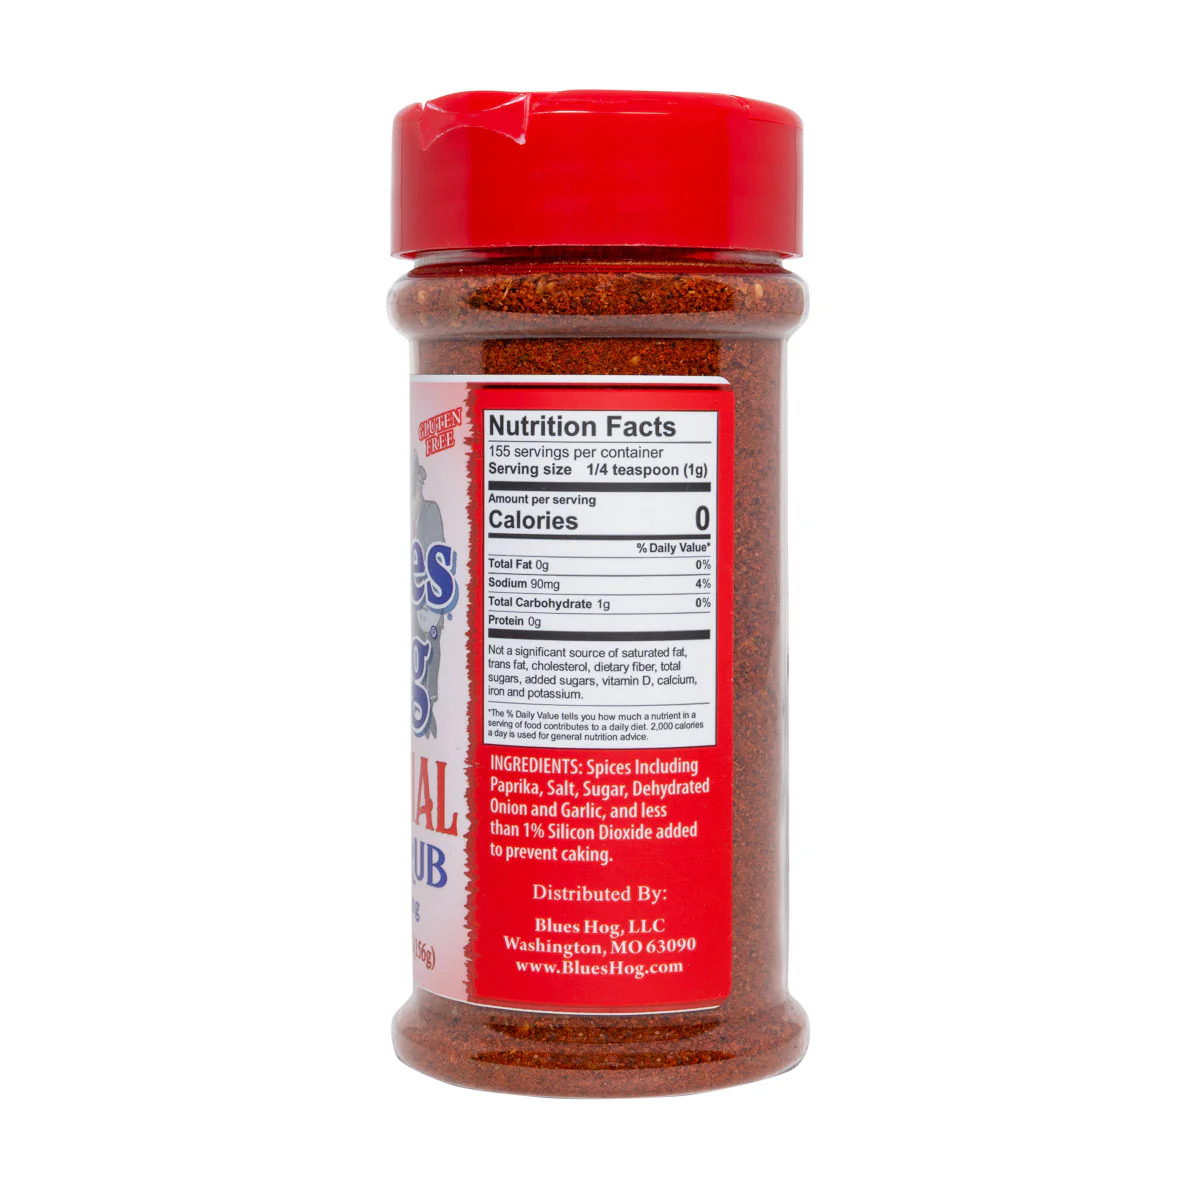 The side of a jar of Blues Hog Original Dry Rub Seasoning with a red lid, showing the nutrition facts label. The label indicates 155 servings per container, with each serving size being 1/4 teaspoon (1g). The mix contains 0 calories, 0g total fat, 90mg sodium, 1g total carbohydrate, and 0g protein. The ingredients include spices such as paprika, salt, sugar, dehydrated onion and garlic, and less than 1% silicon dioxide to prevent caking.